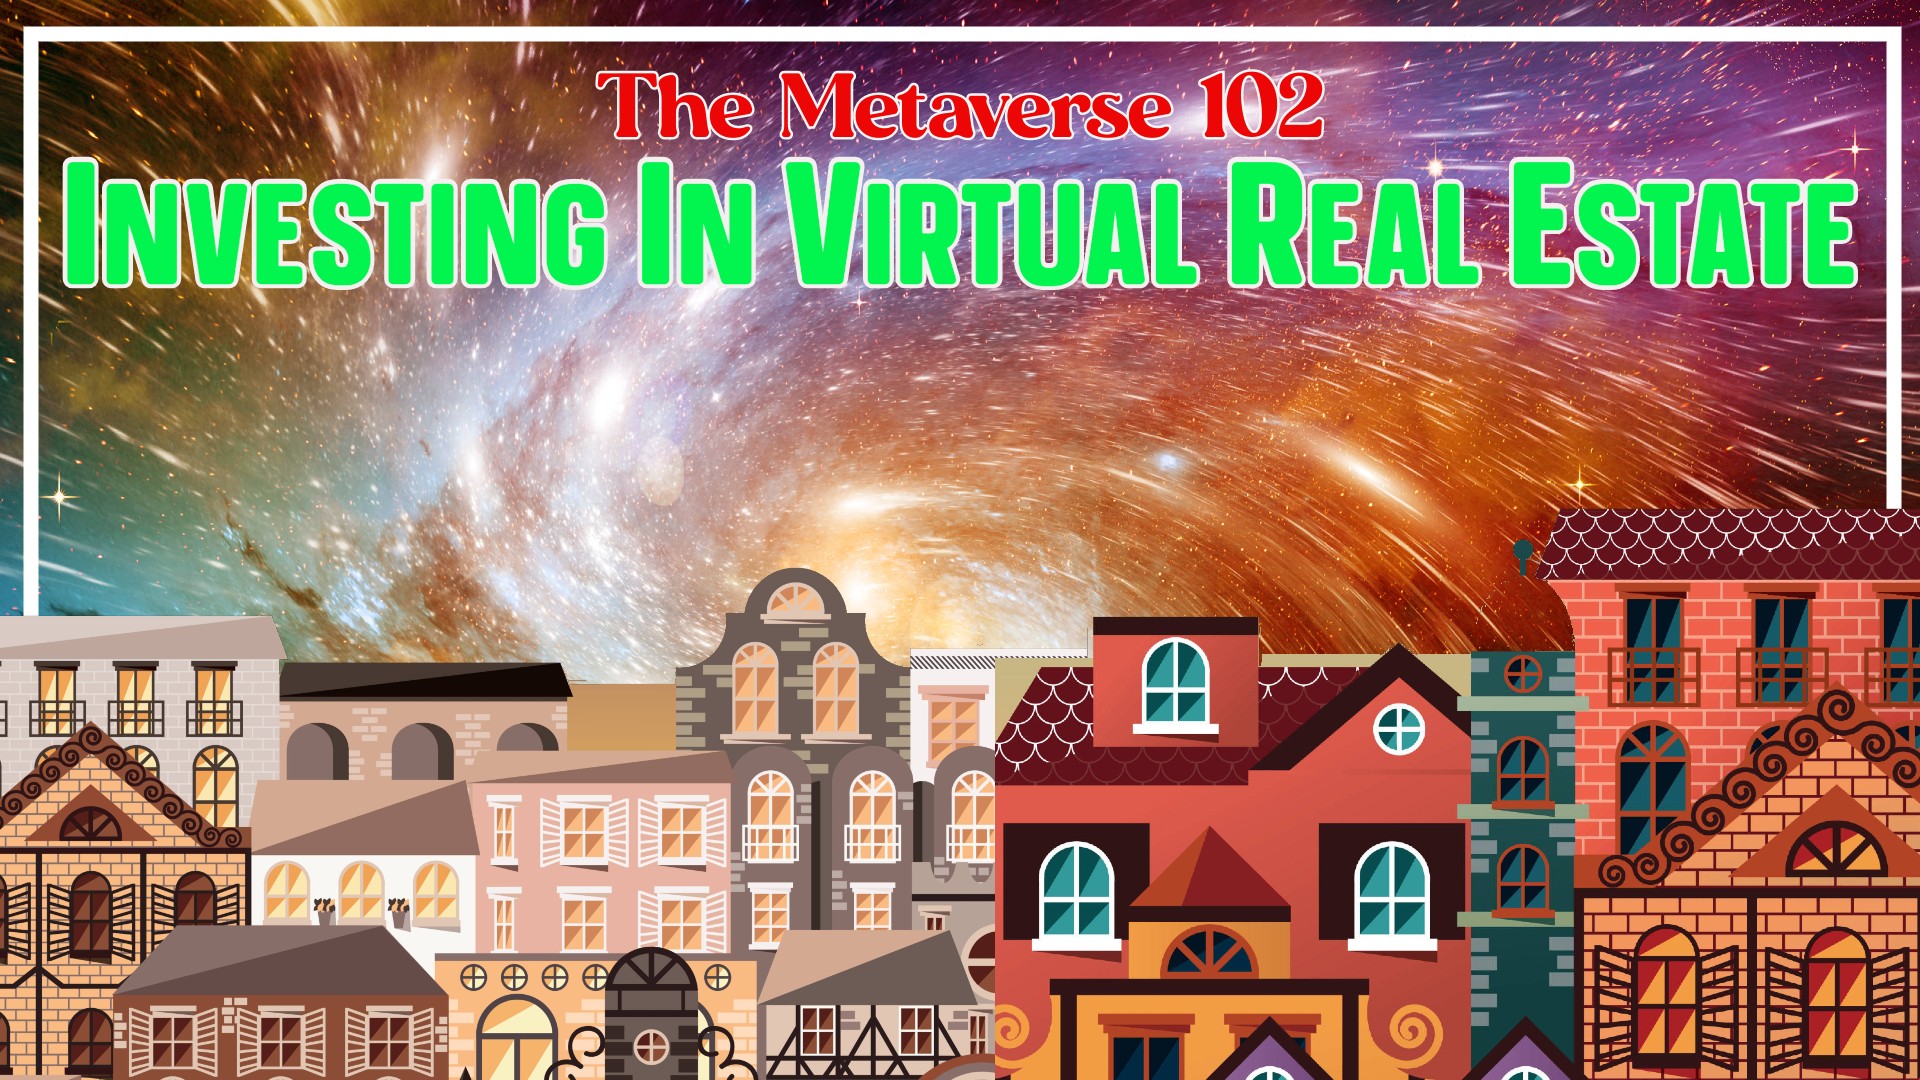 The Metaverse 102: Investing in Virtual Real Estate